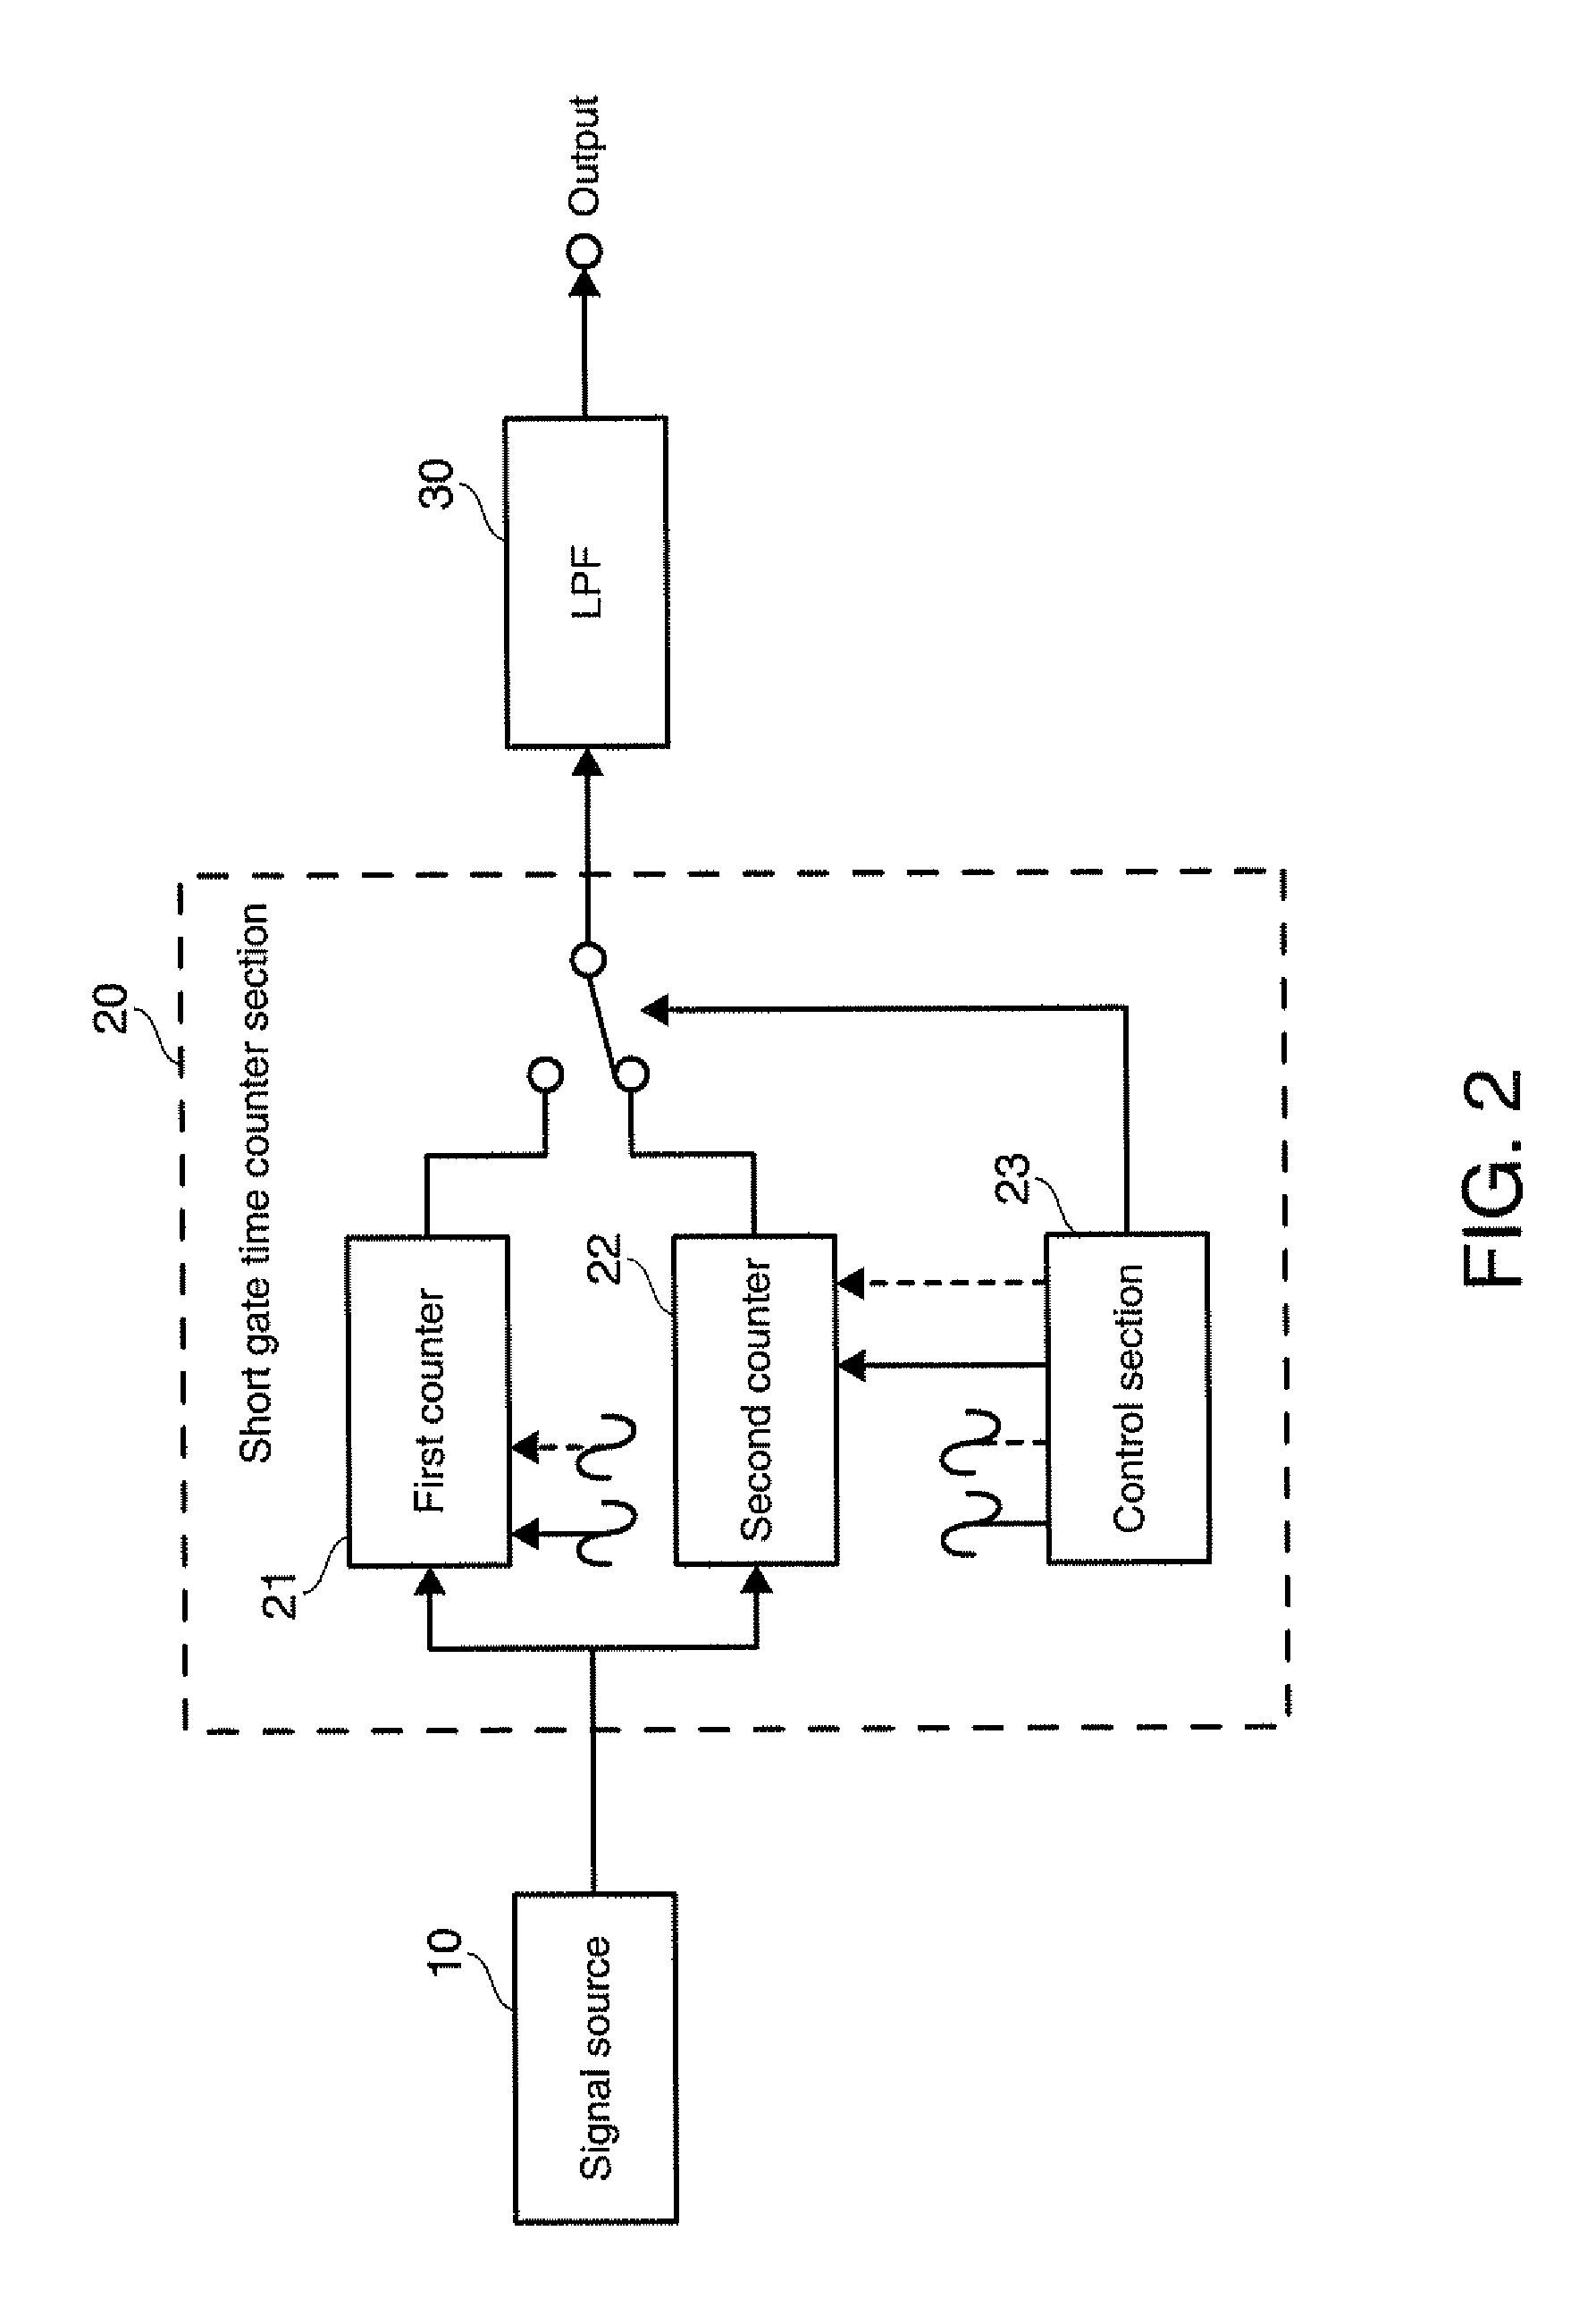 Frequency measurement device